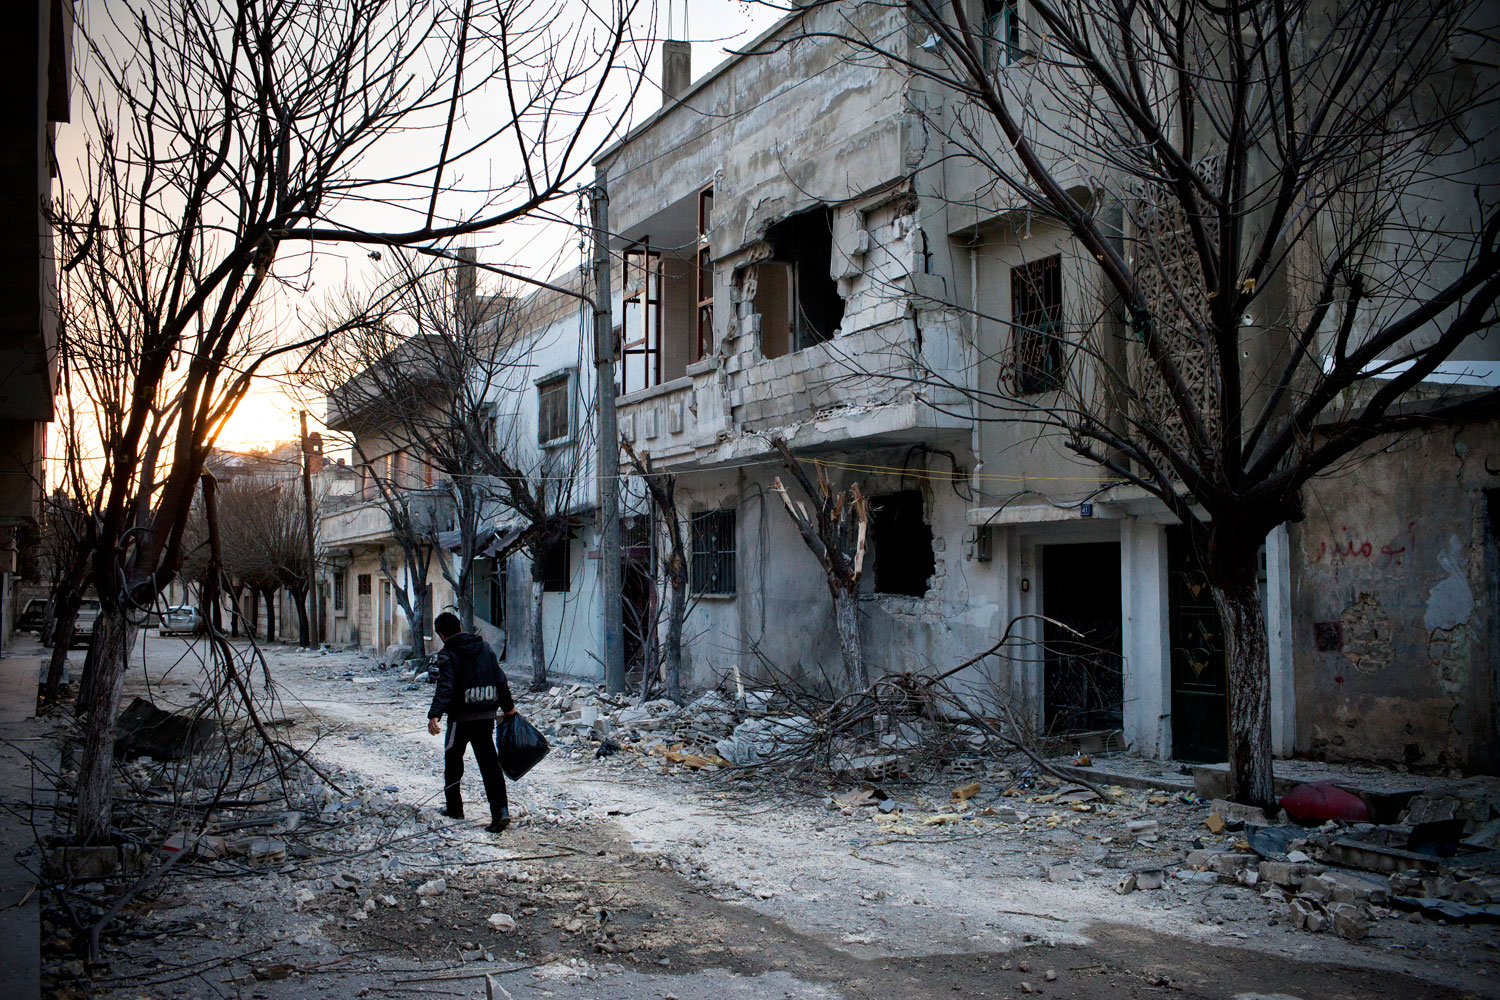 Feb. 24, 2012. A boy walks down a street in Bab Amr, Homs. The house where Daniels and three other journalists were holed up for days is behind the building at right.